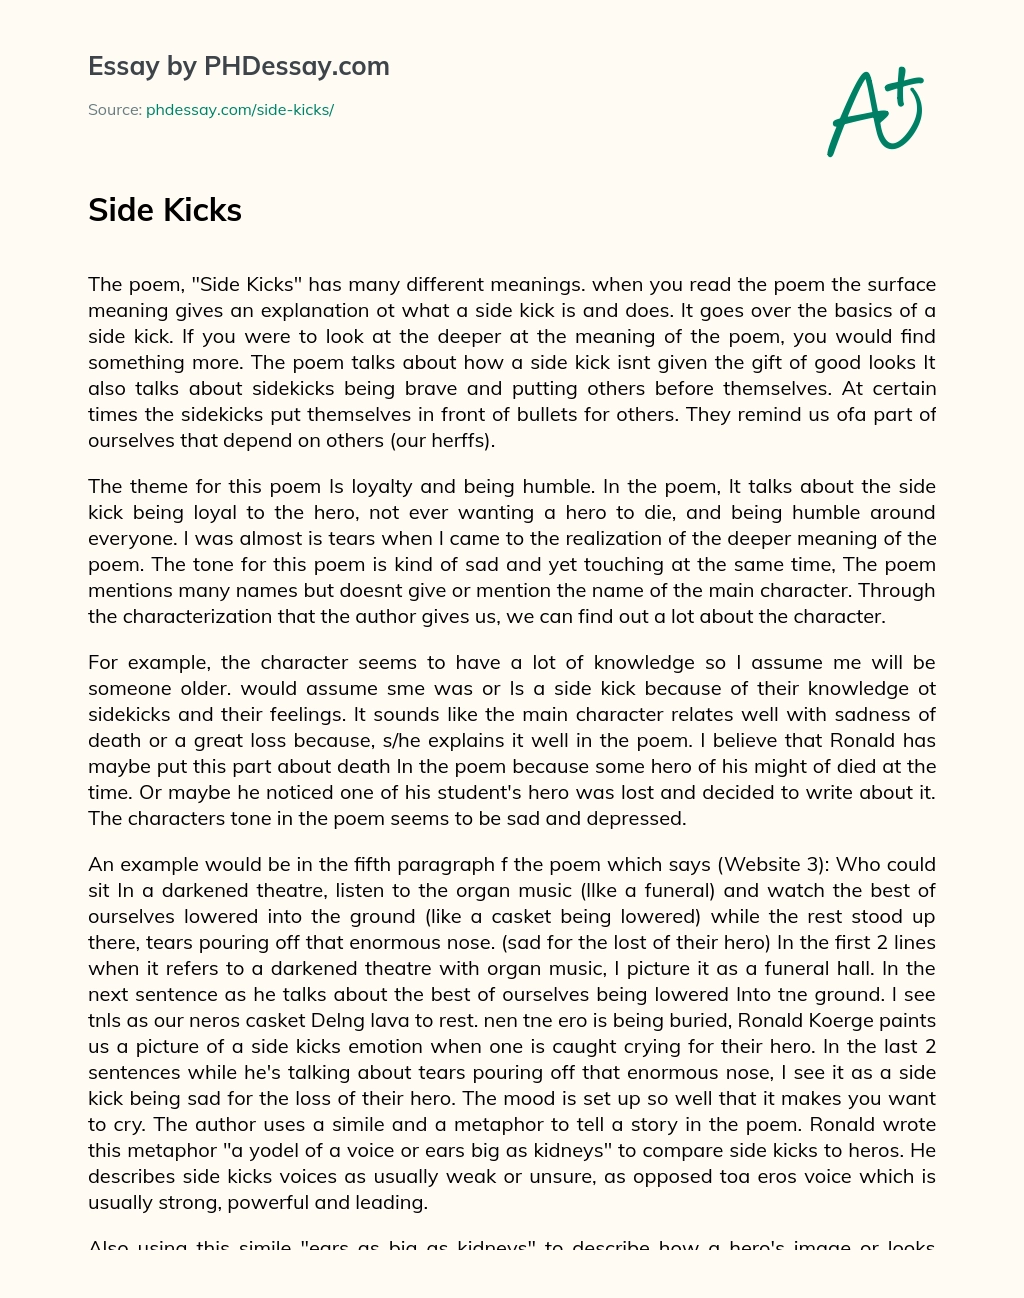 The Deeper Meaning of Loyalty and Humility in Side Kicks Poem essay